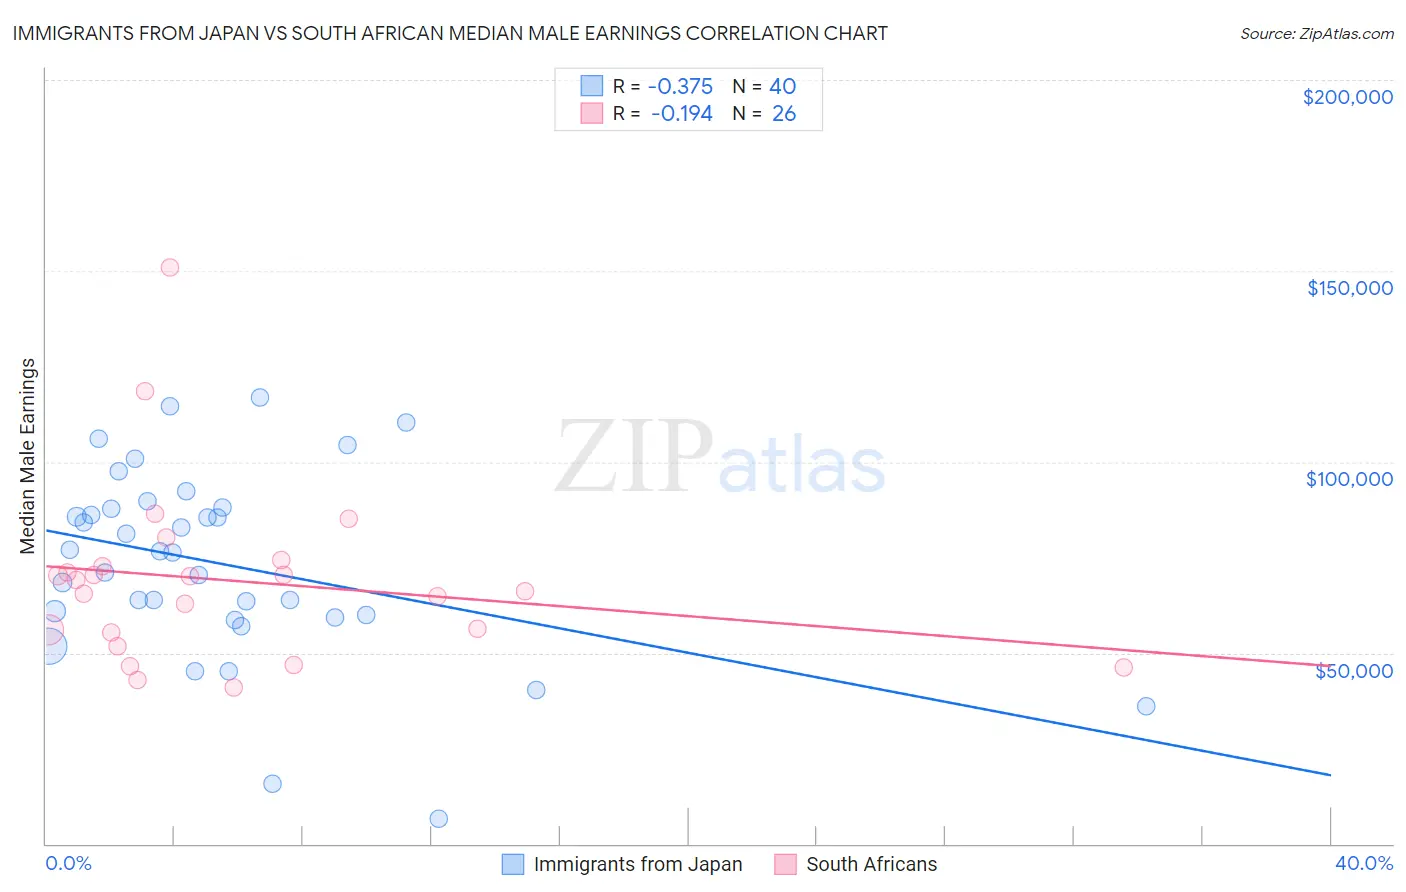 Immigrants from Japan vs South African Median Male Earnings